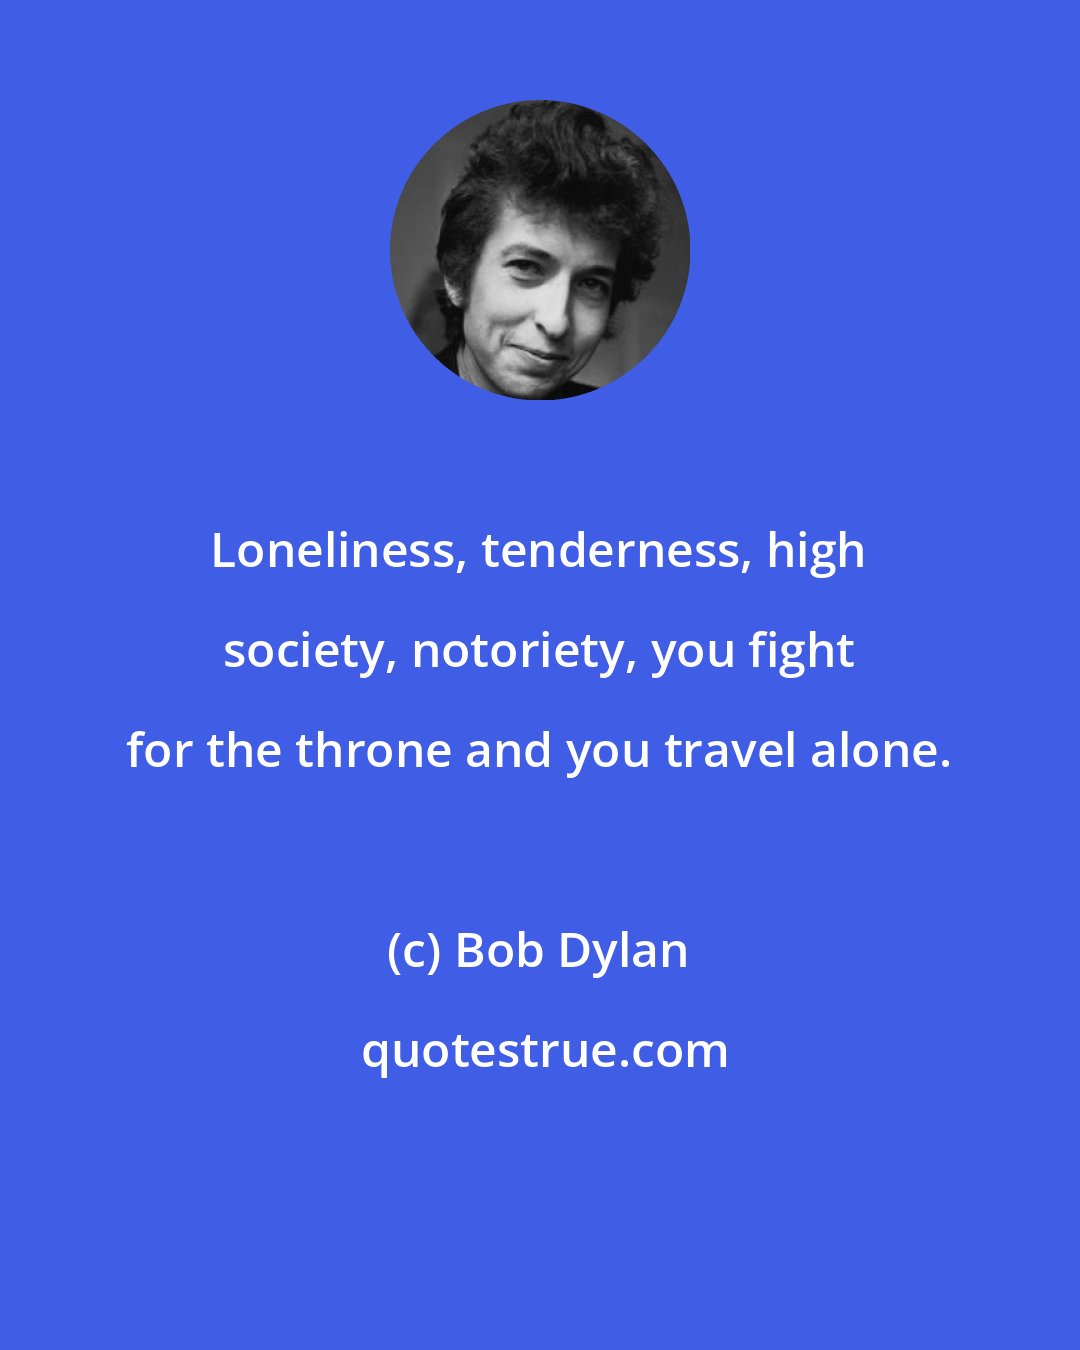 Bob Dylan: Loneliness, tenderness, high society, notoriety, you fight for the throne and you travel alone.